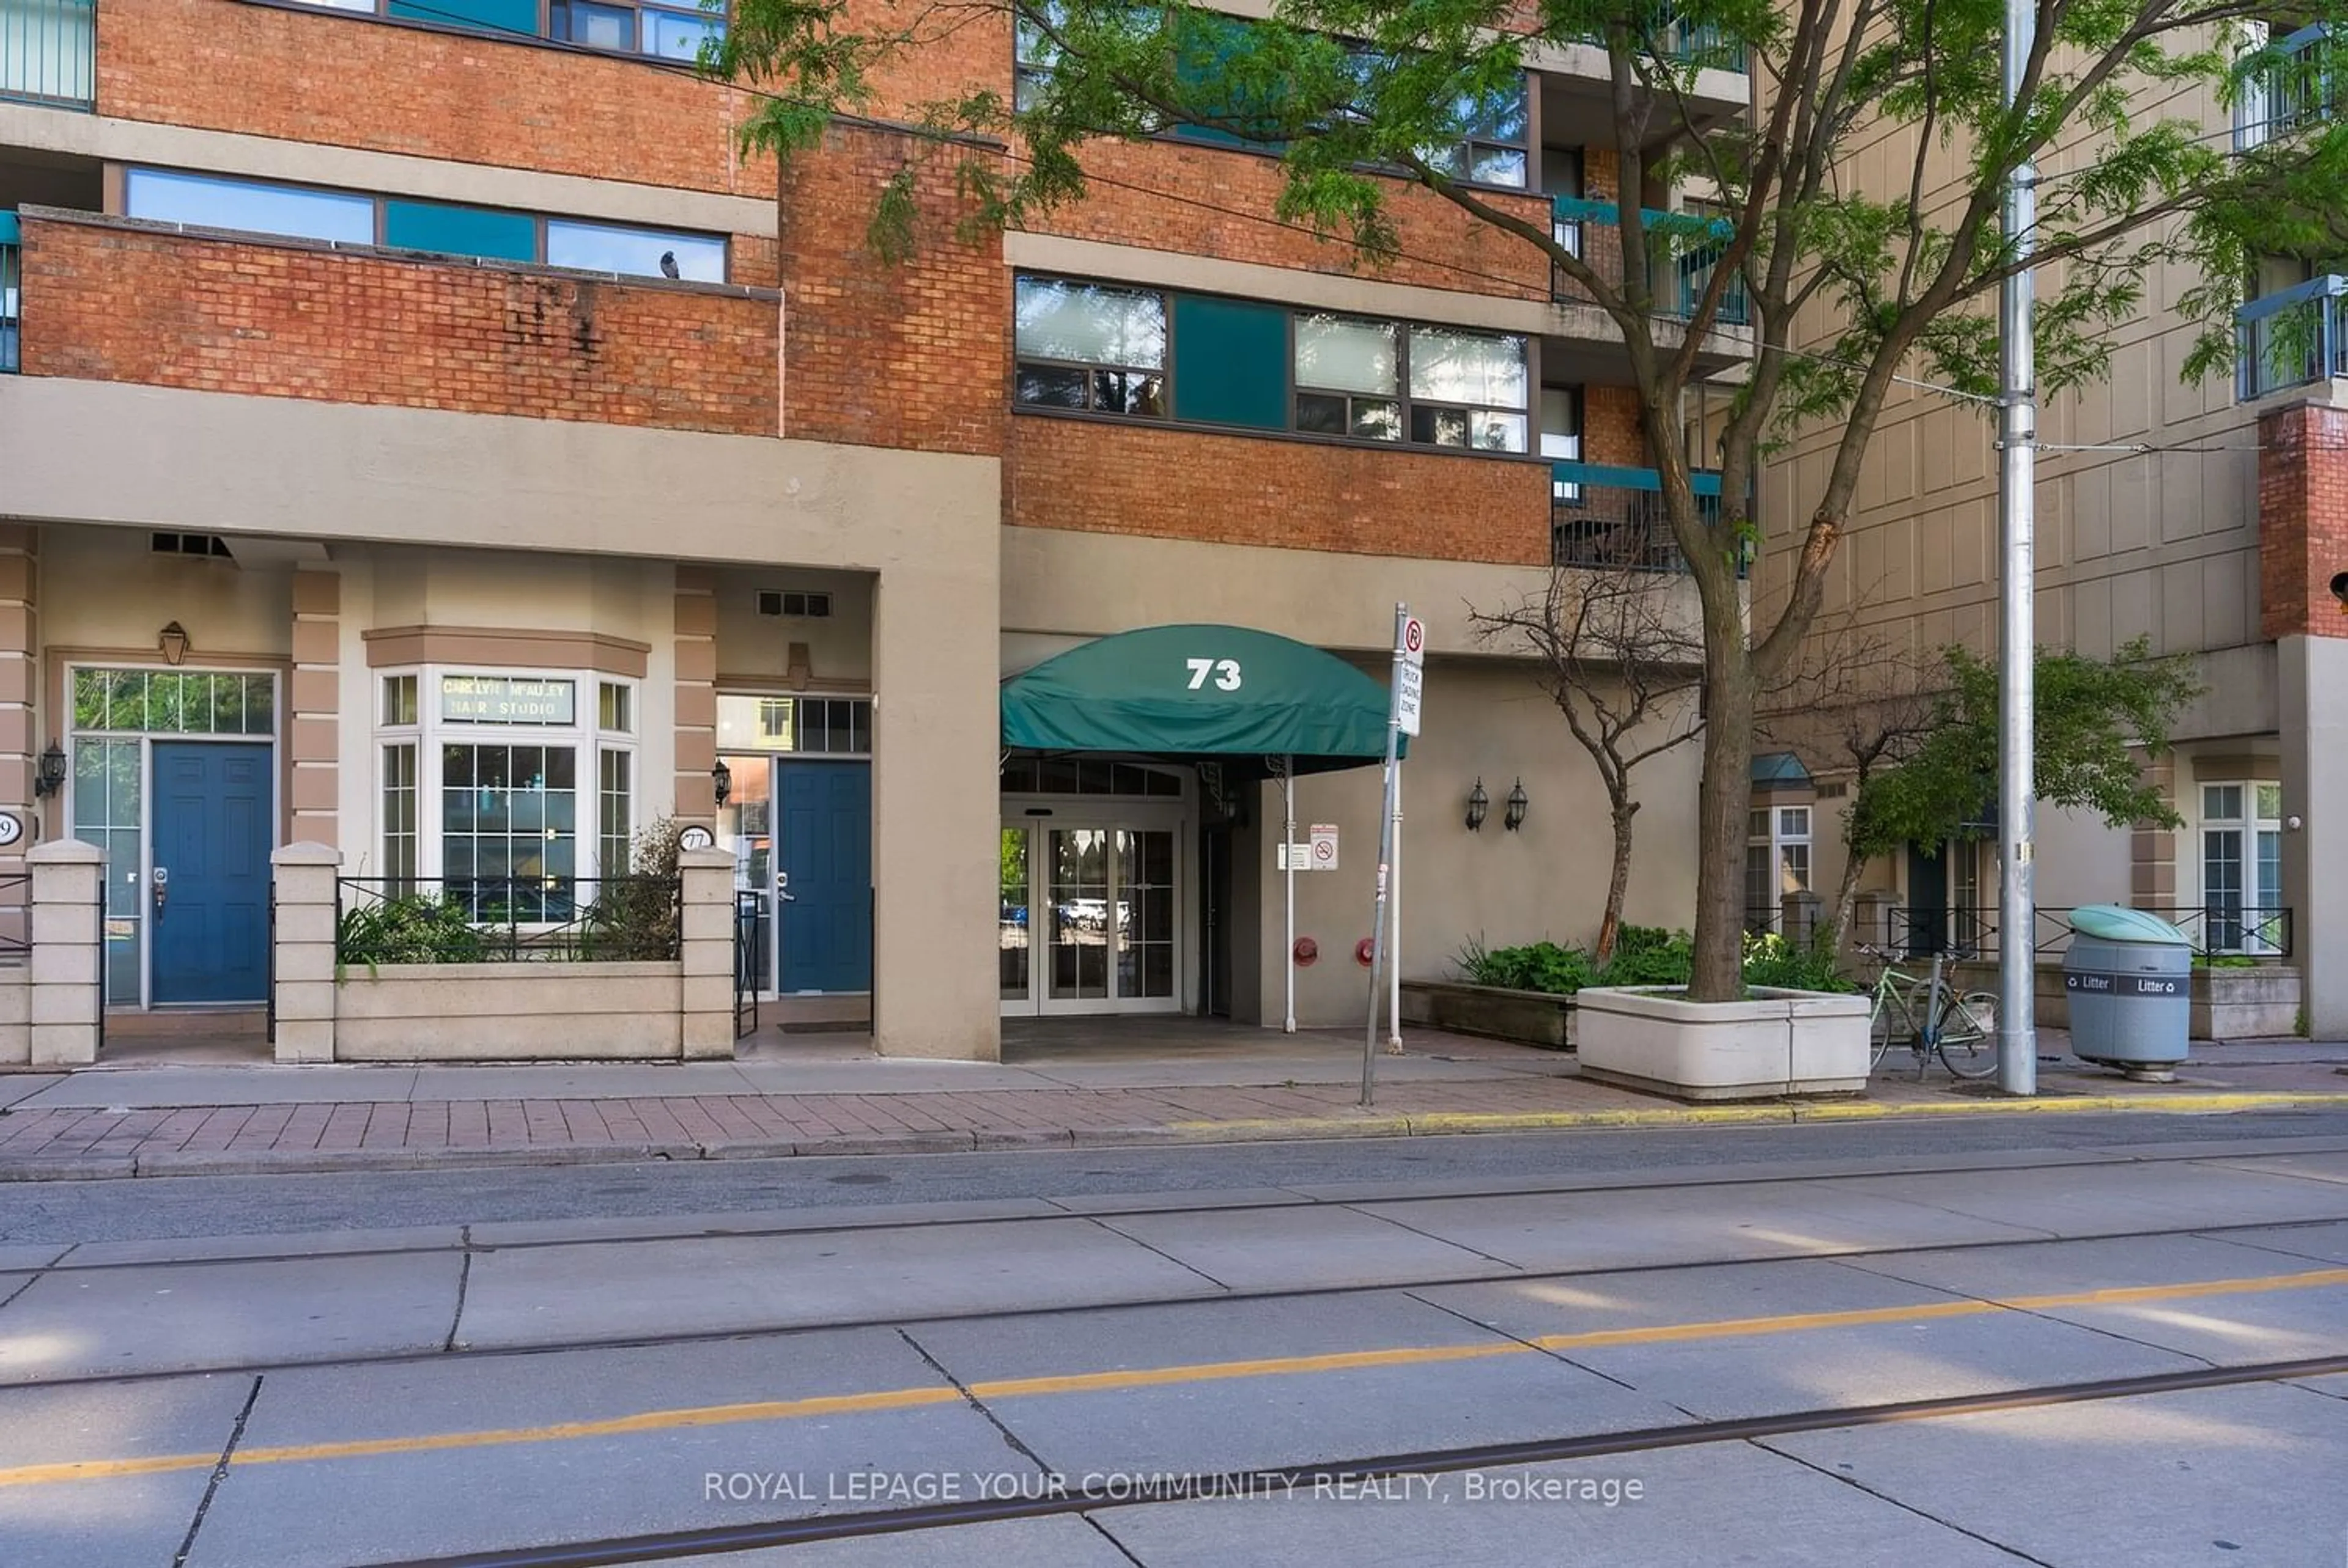 A pic from exterior of the house or condo for 73 Mccaul St #237, Toronto Ontario M5T 2X2